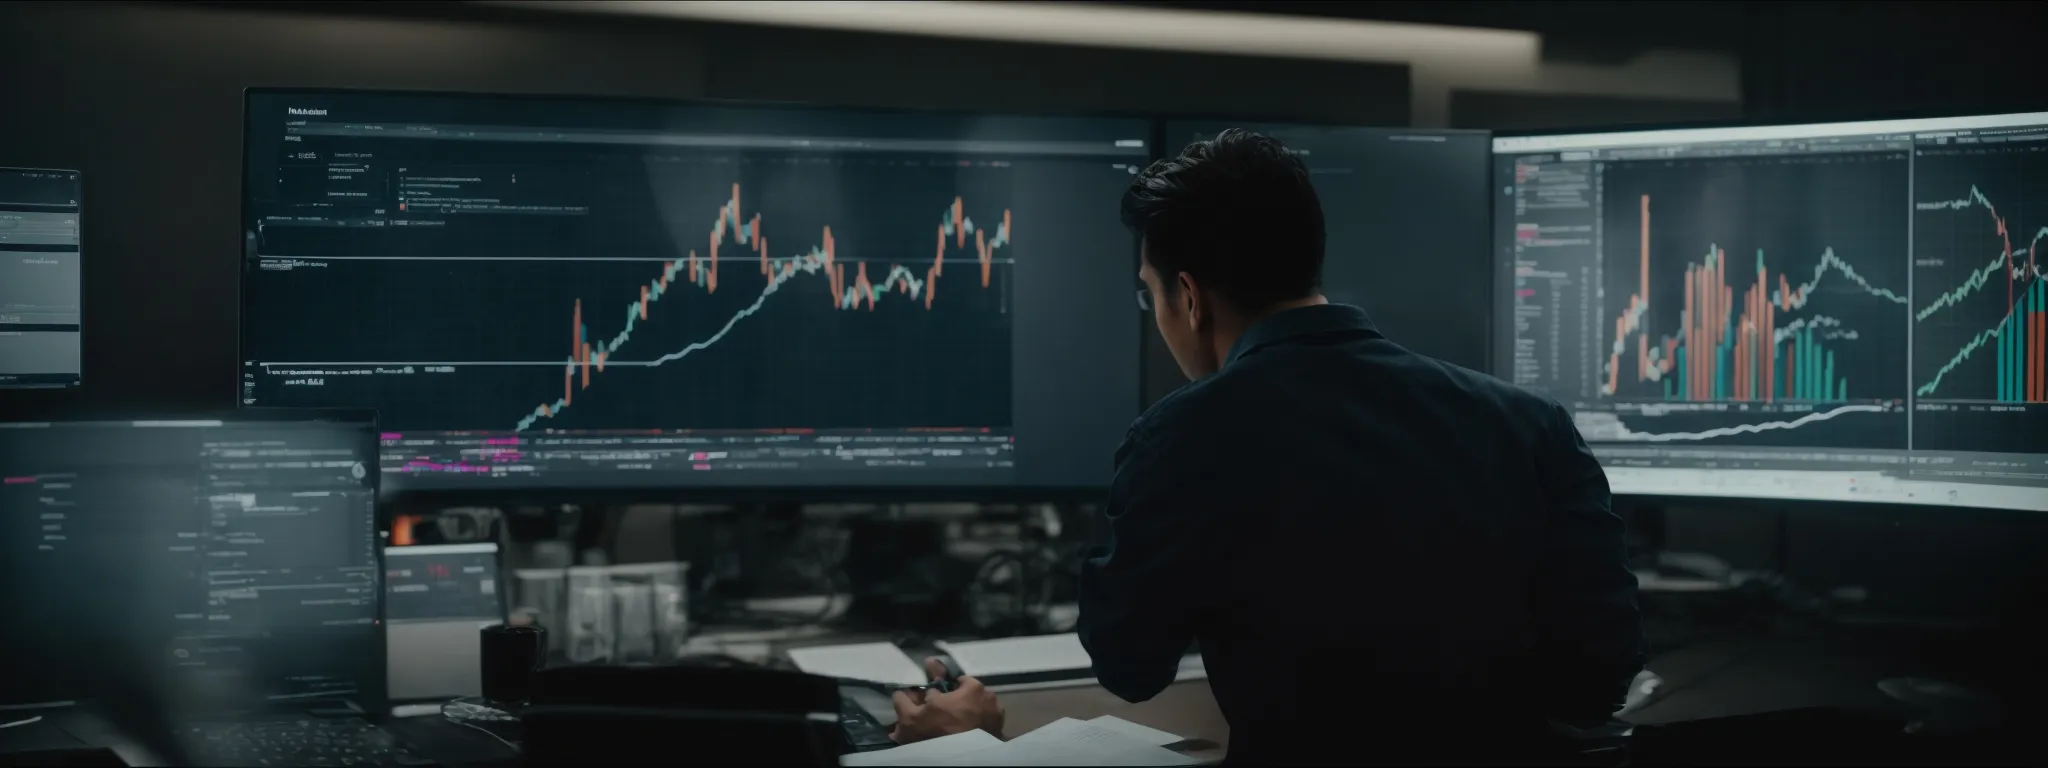 a broad view of a marketer analyzing graphs on a computer screen, symbolizing the evaluation of diverse seo metrics.